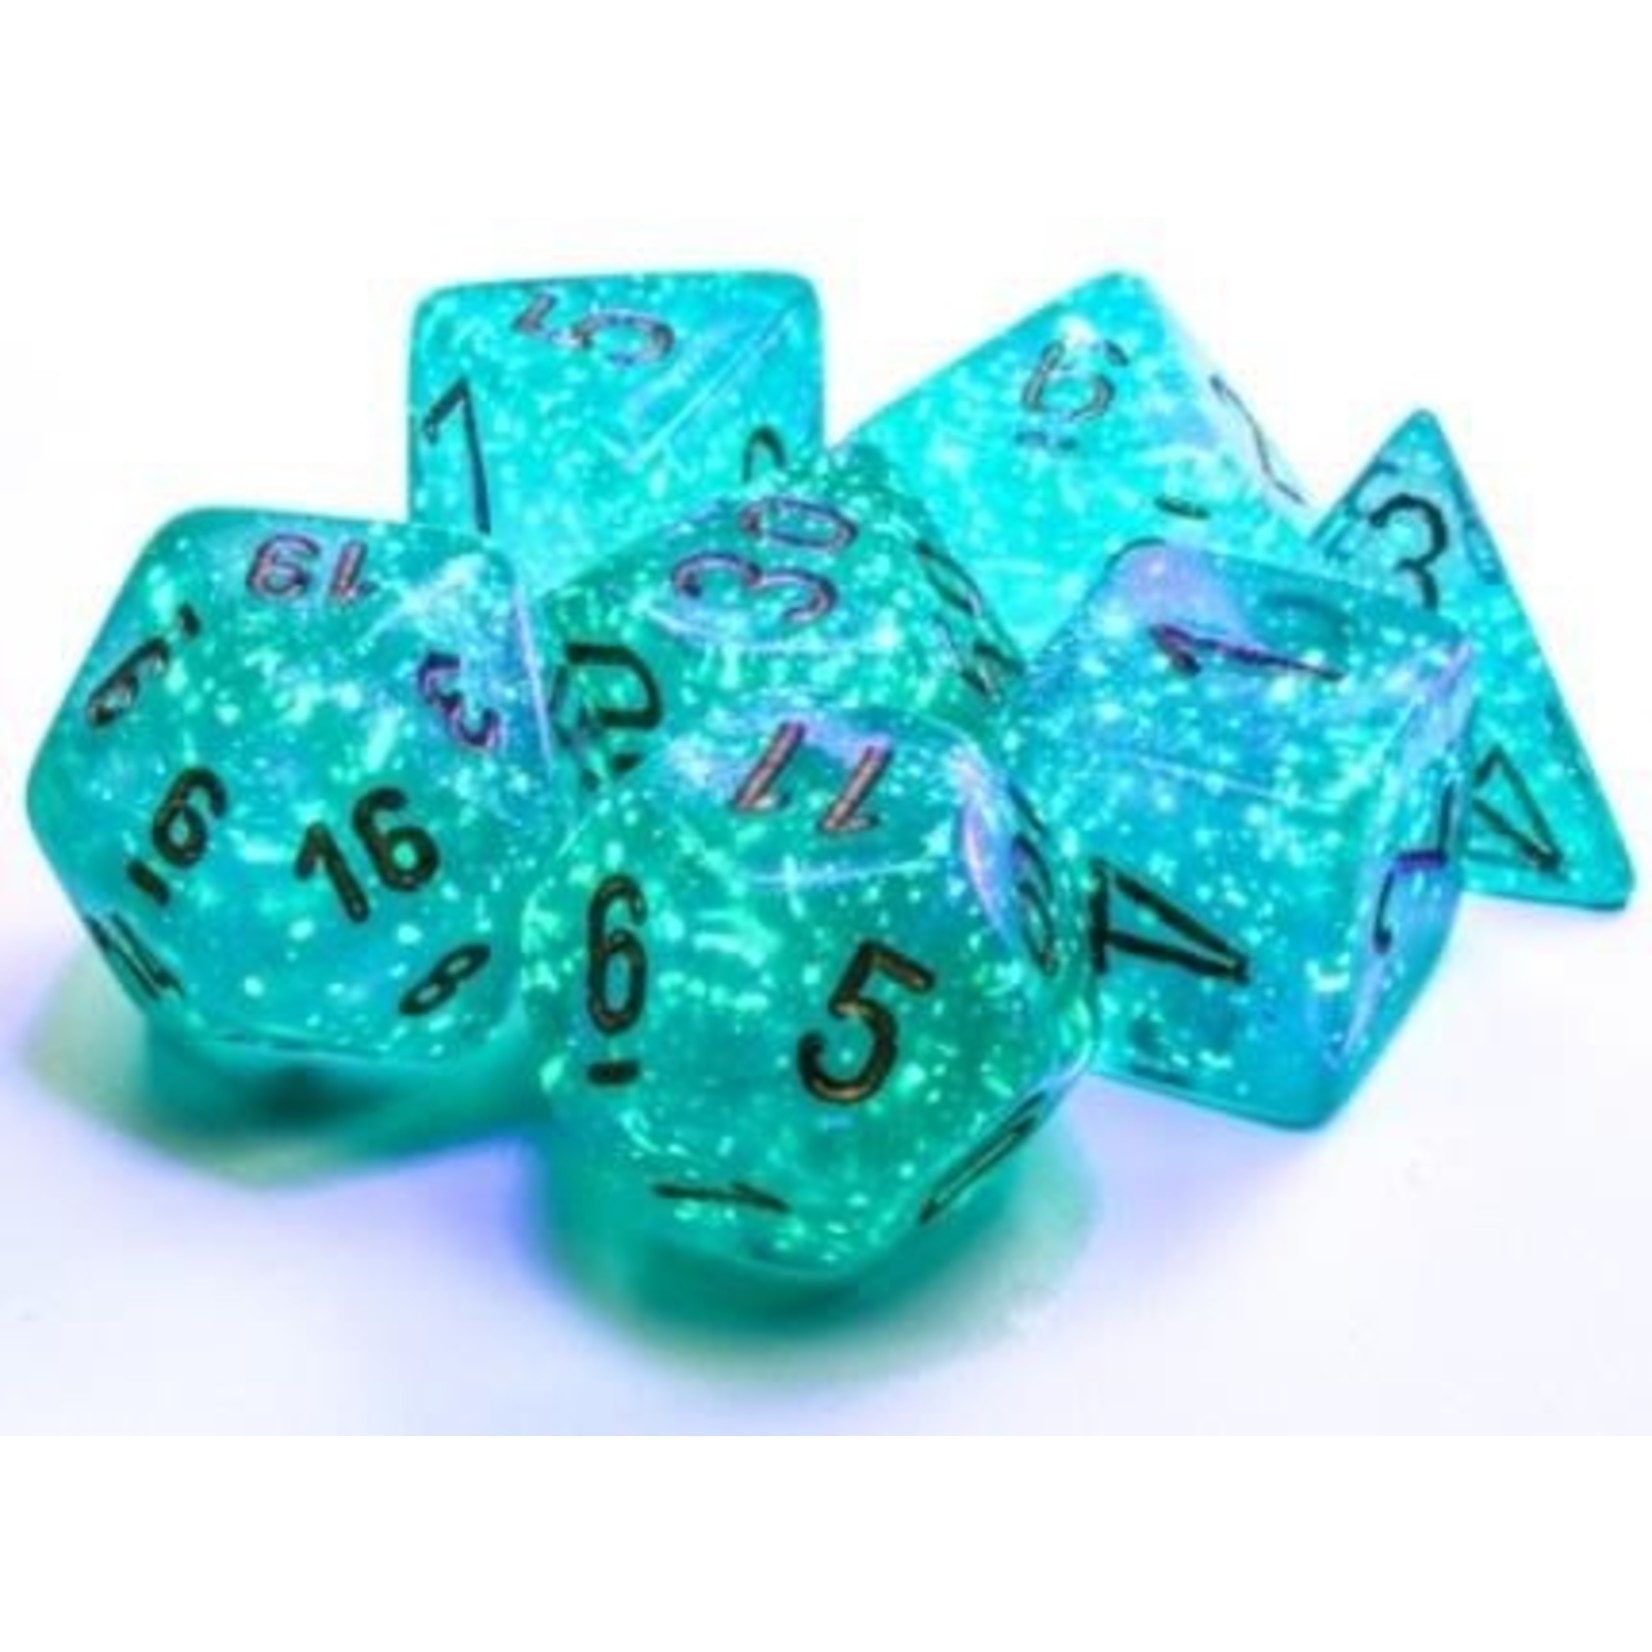 Chessex Borealis Polyhedral Teal Gold Luminary 7 die set